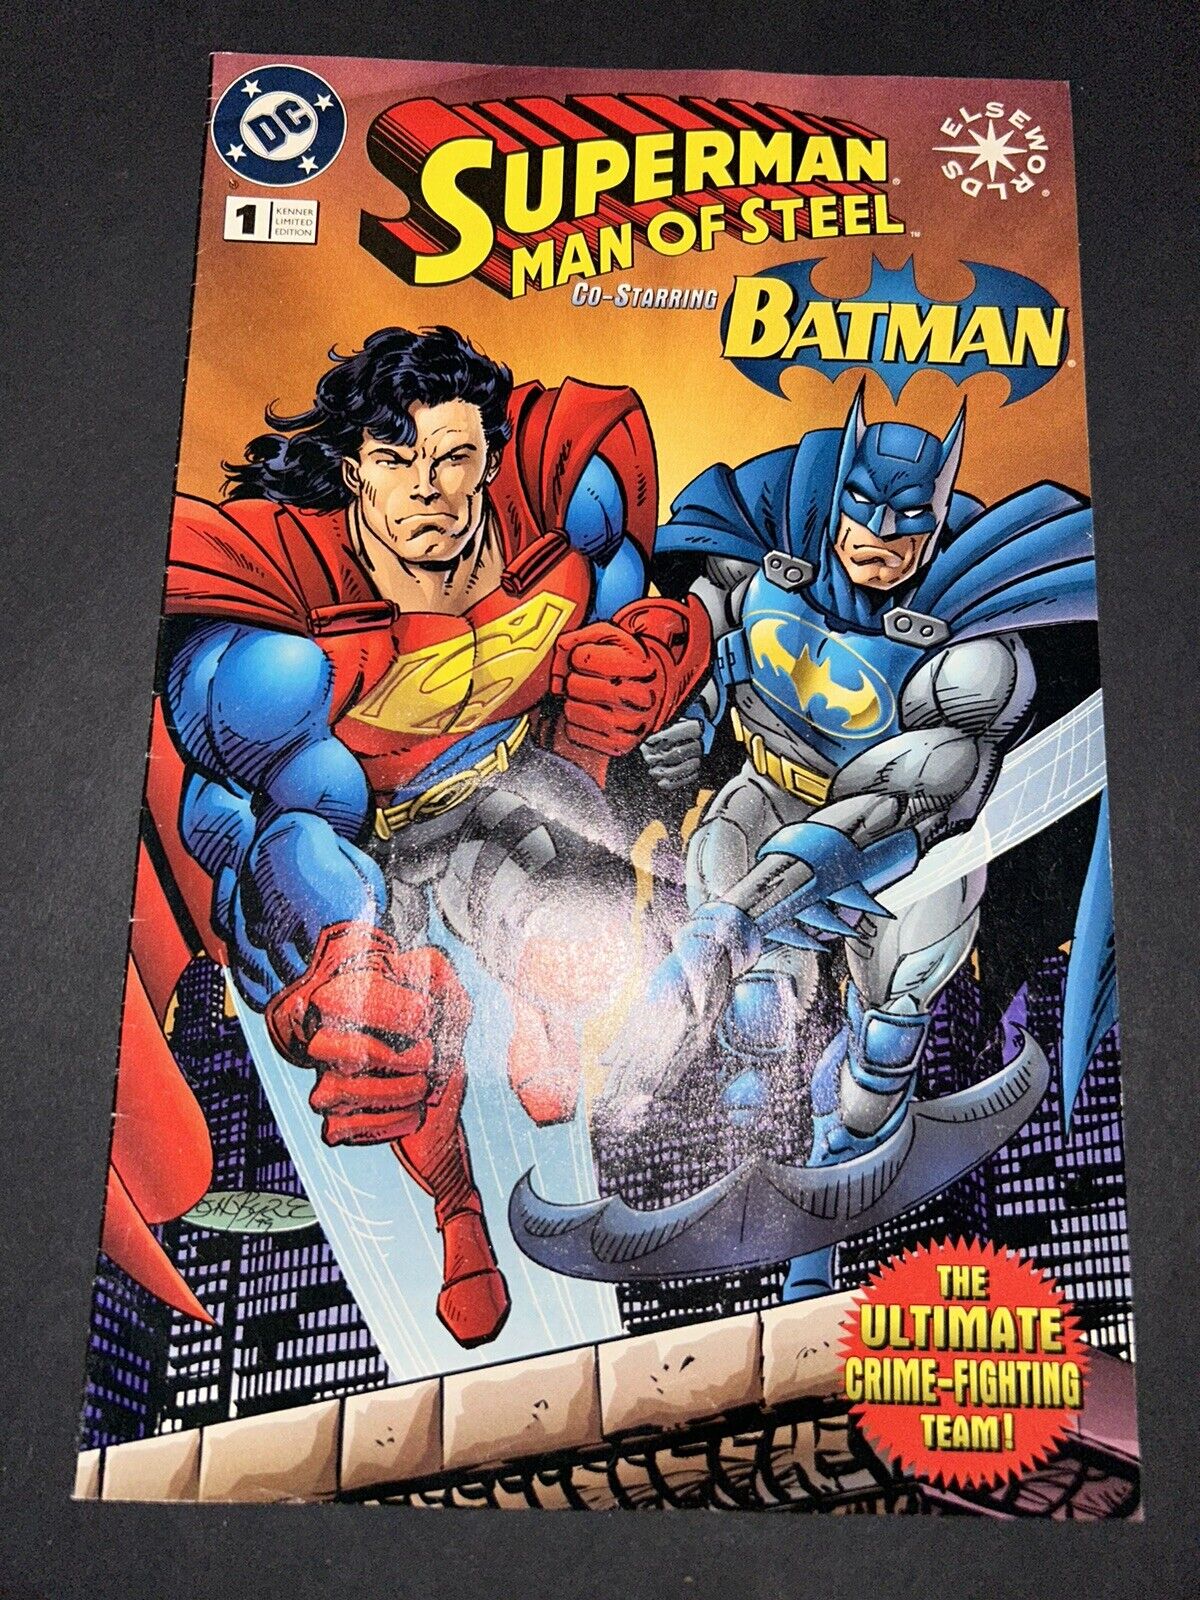 Superman: Man of Steel Co-Starring Batman #1 Kenner Limited Edition